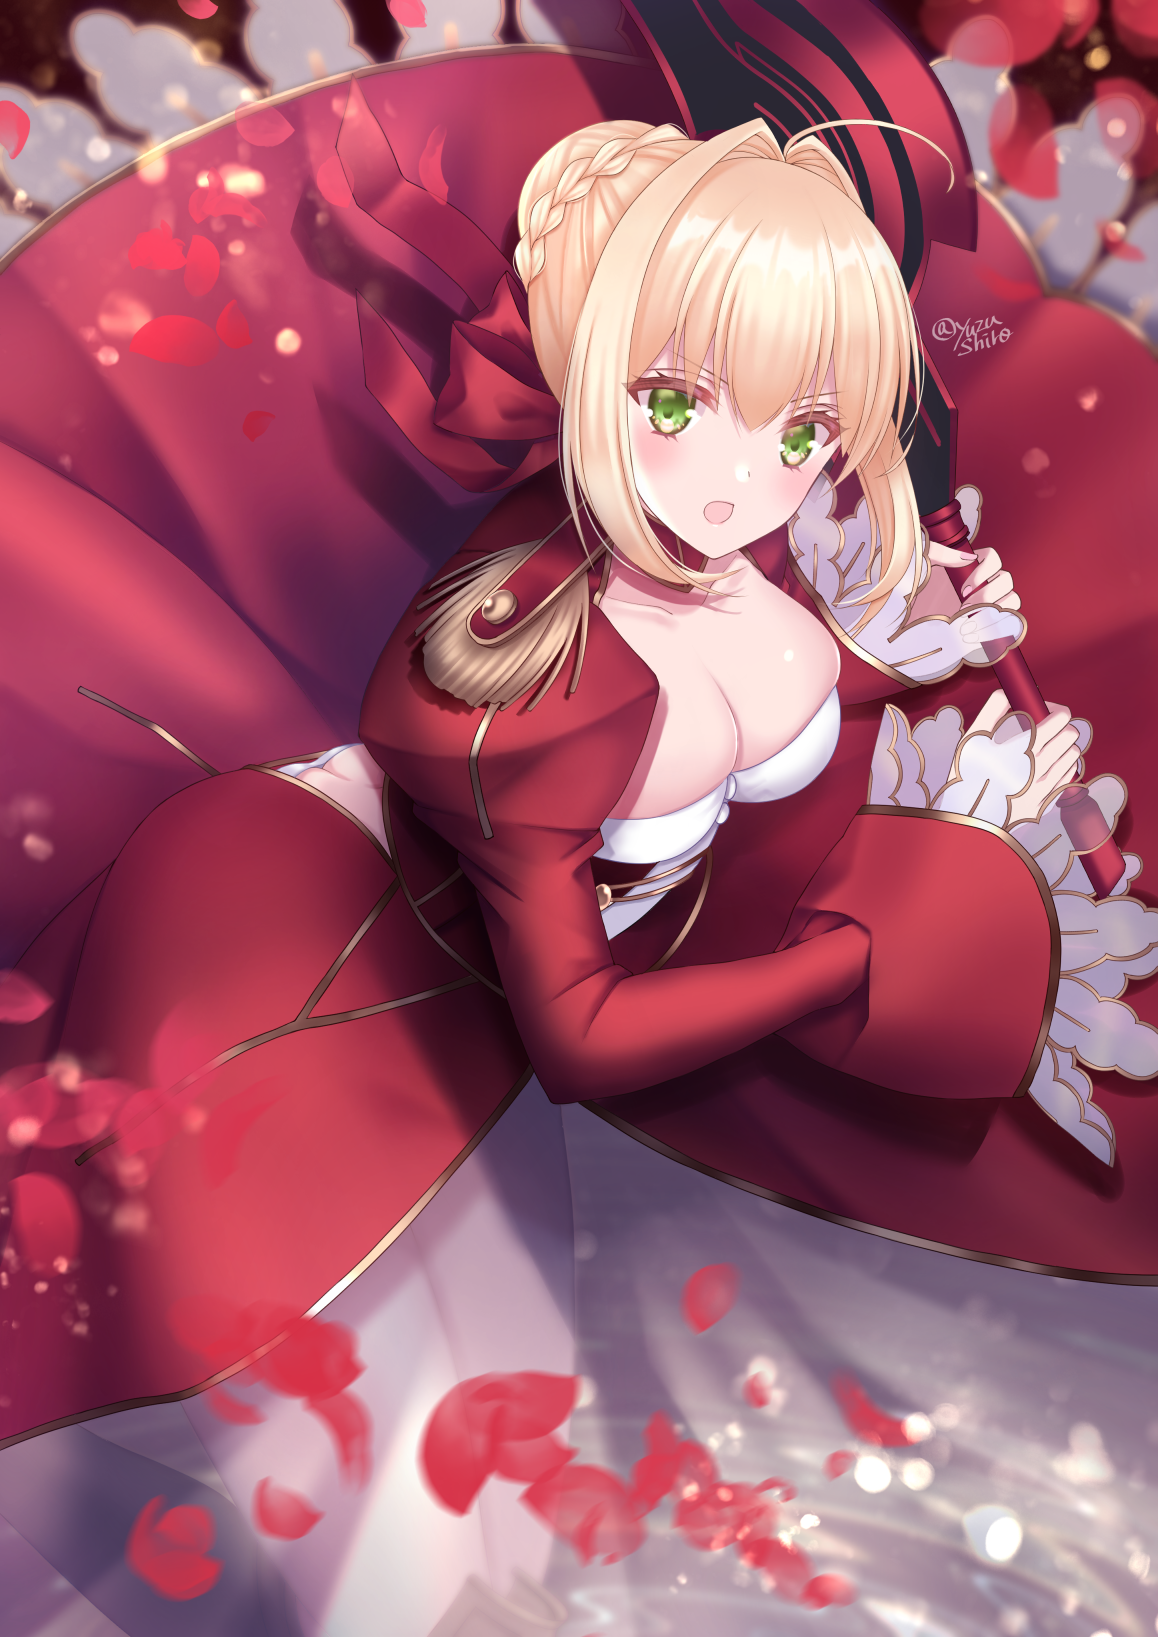 Anime 1158x1637 anime anime girls Fate series Fate/Extra Fate/Extra CCC Fate/Grand Order Nero Claudius long hair blonde solo artwork digital art fan art petals green eyes cleavage